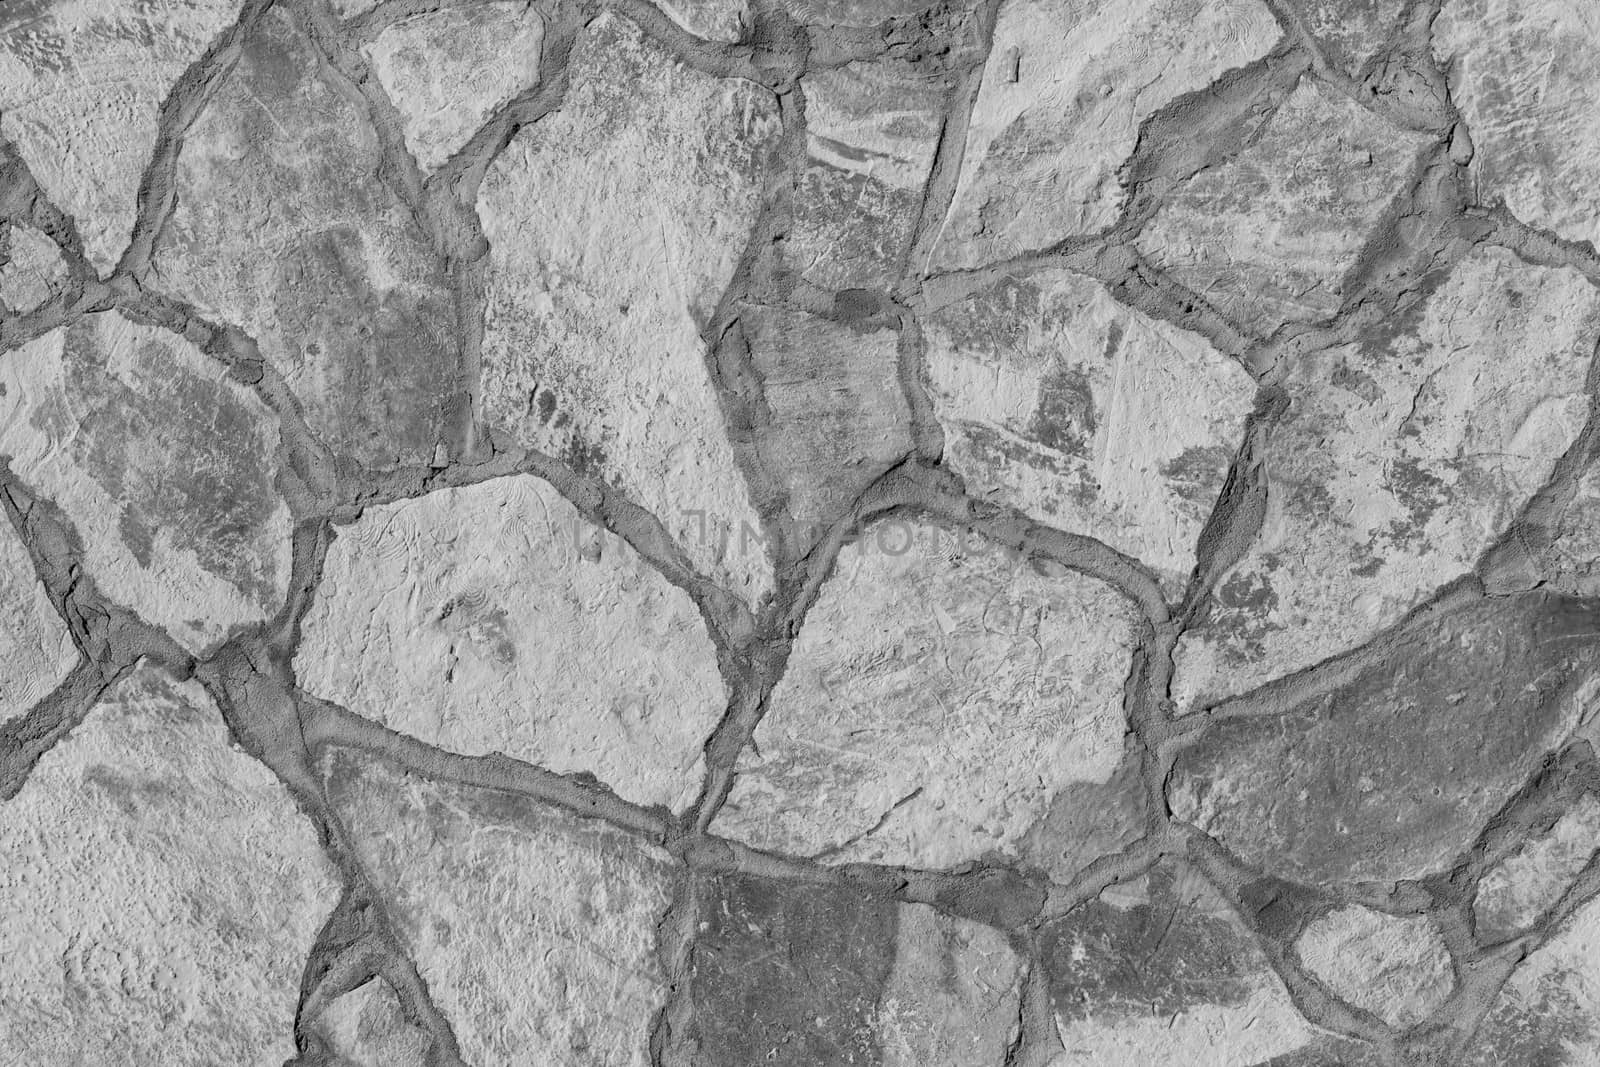 Background of a large stone wall texture (black and white)